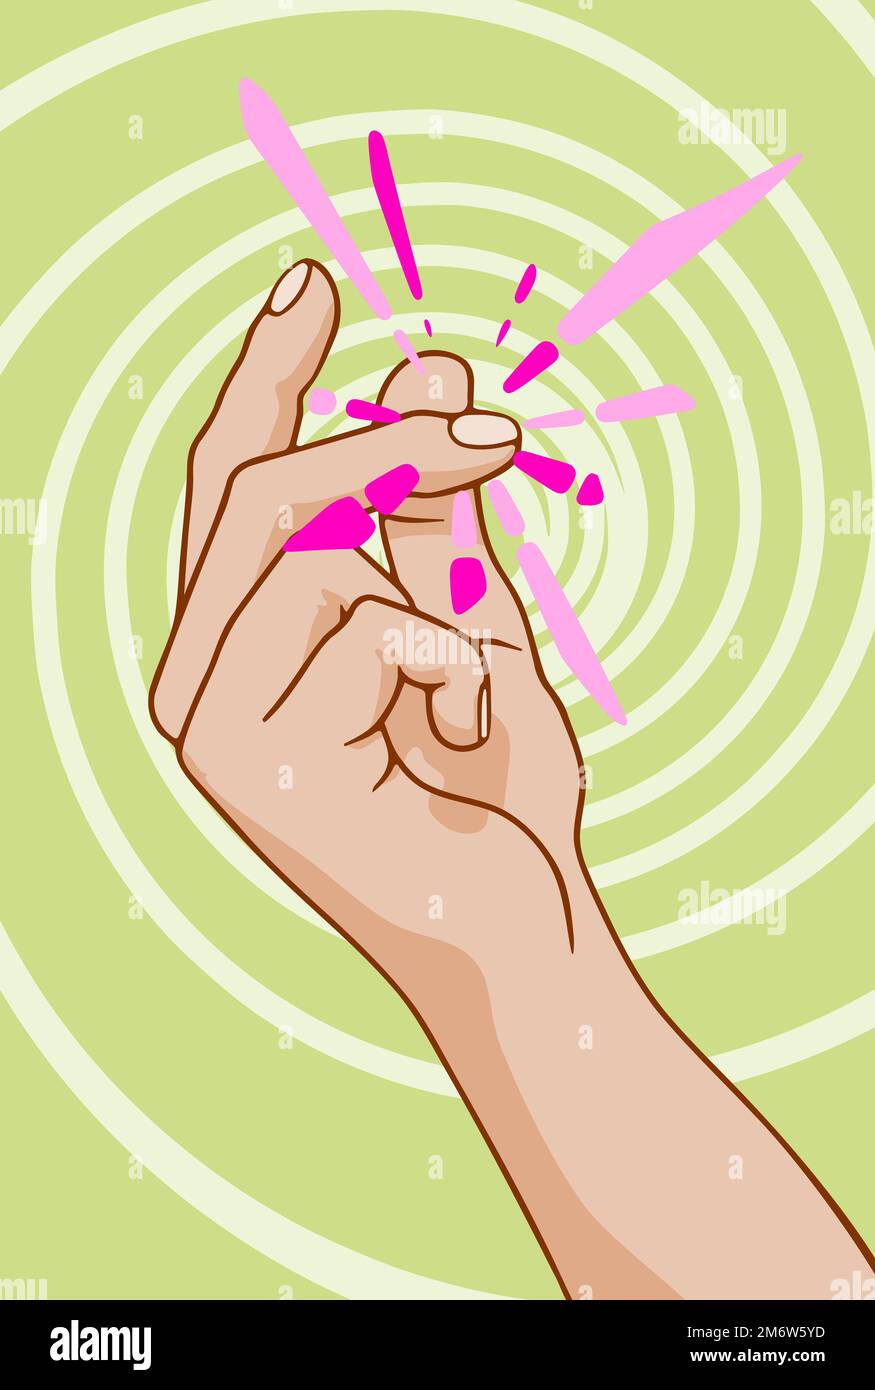 Snapping fingers for hypnosis Stock Photo